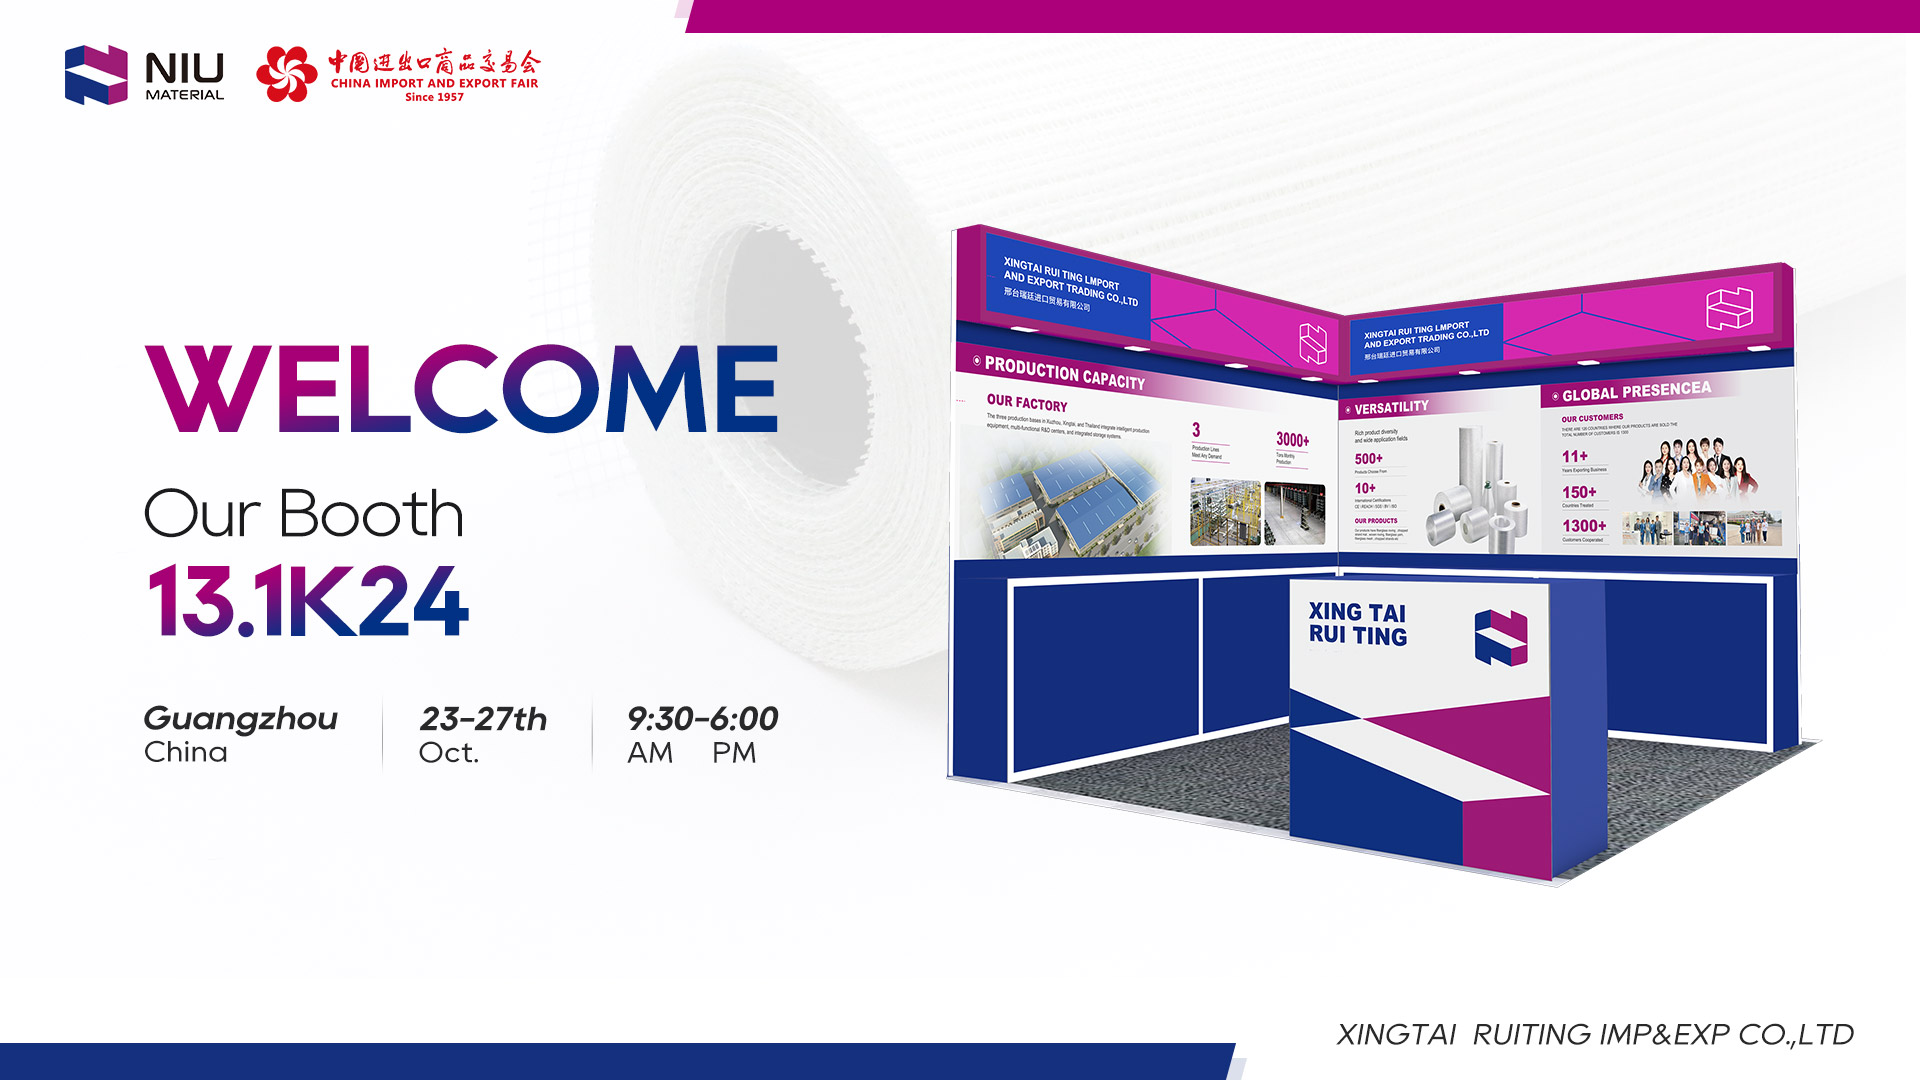 Discover New Opportunities at the 2023 Canton Fair in Guangzhou - Visit Booth 13.1K24!